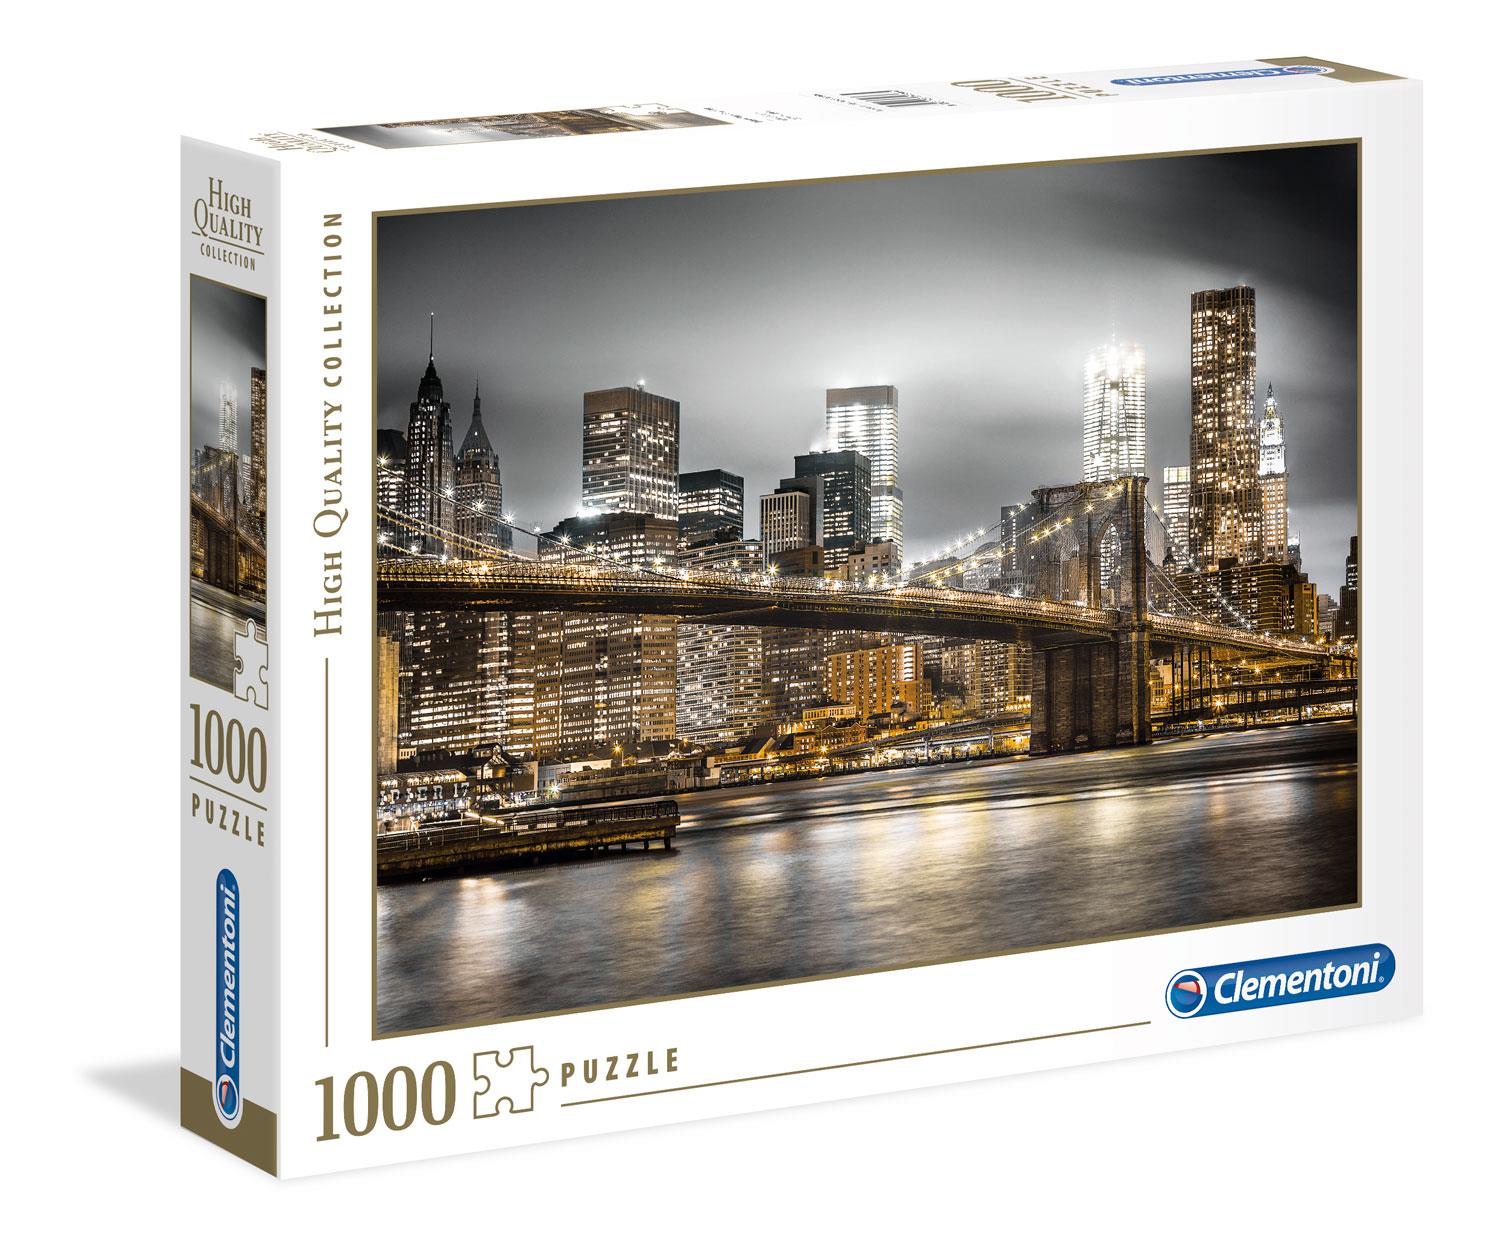 Special Shaped Puzzle 2000 Pieces Top Quality Hot Sale Brand New City of  Sky Impossible Challenge